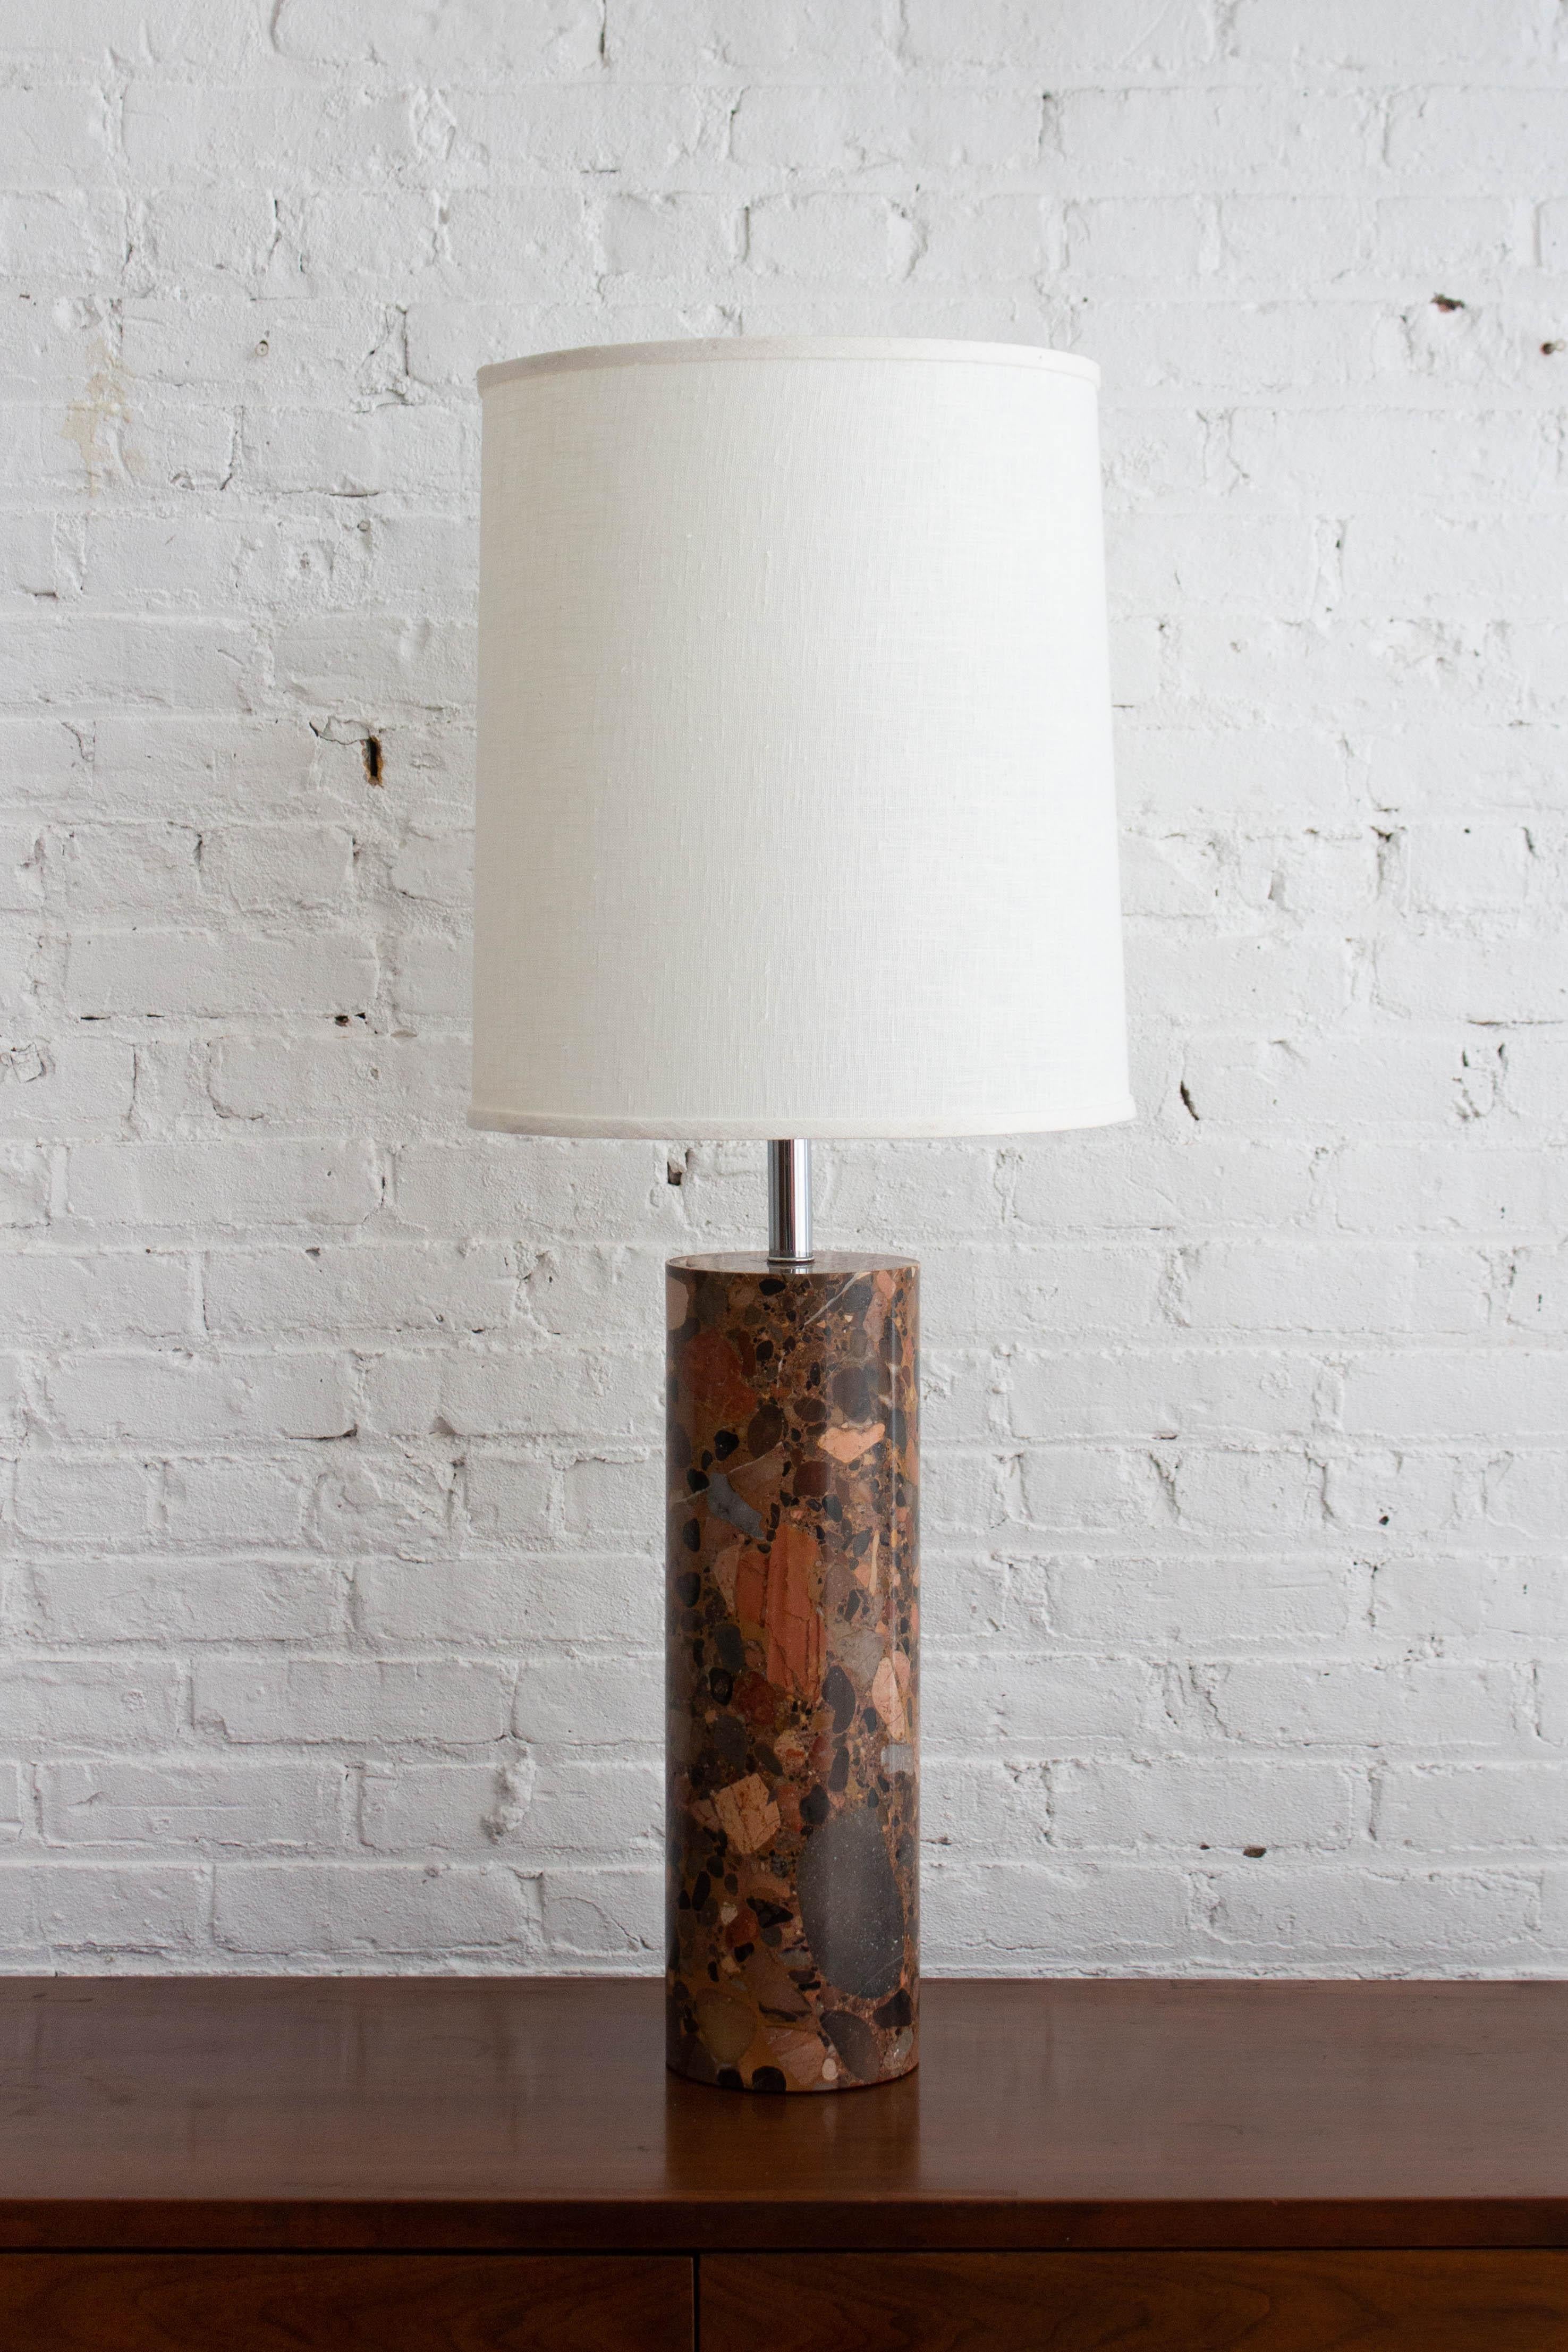 A cylindrical solid terrazzo marble table lamp attributed to Walter Von Nessen. Chrome hardware with full range dimmer socket. Beautiful color variations throughout the stone, ranging from reds to beiges and grays. Pair available, sold individually.